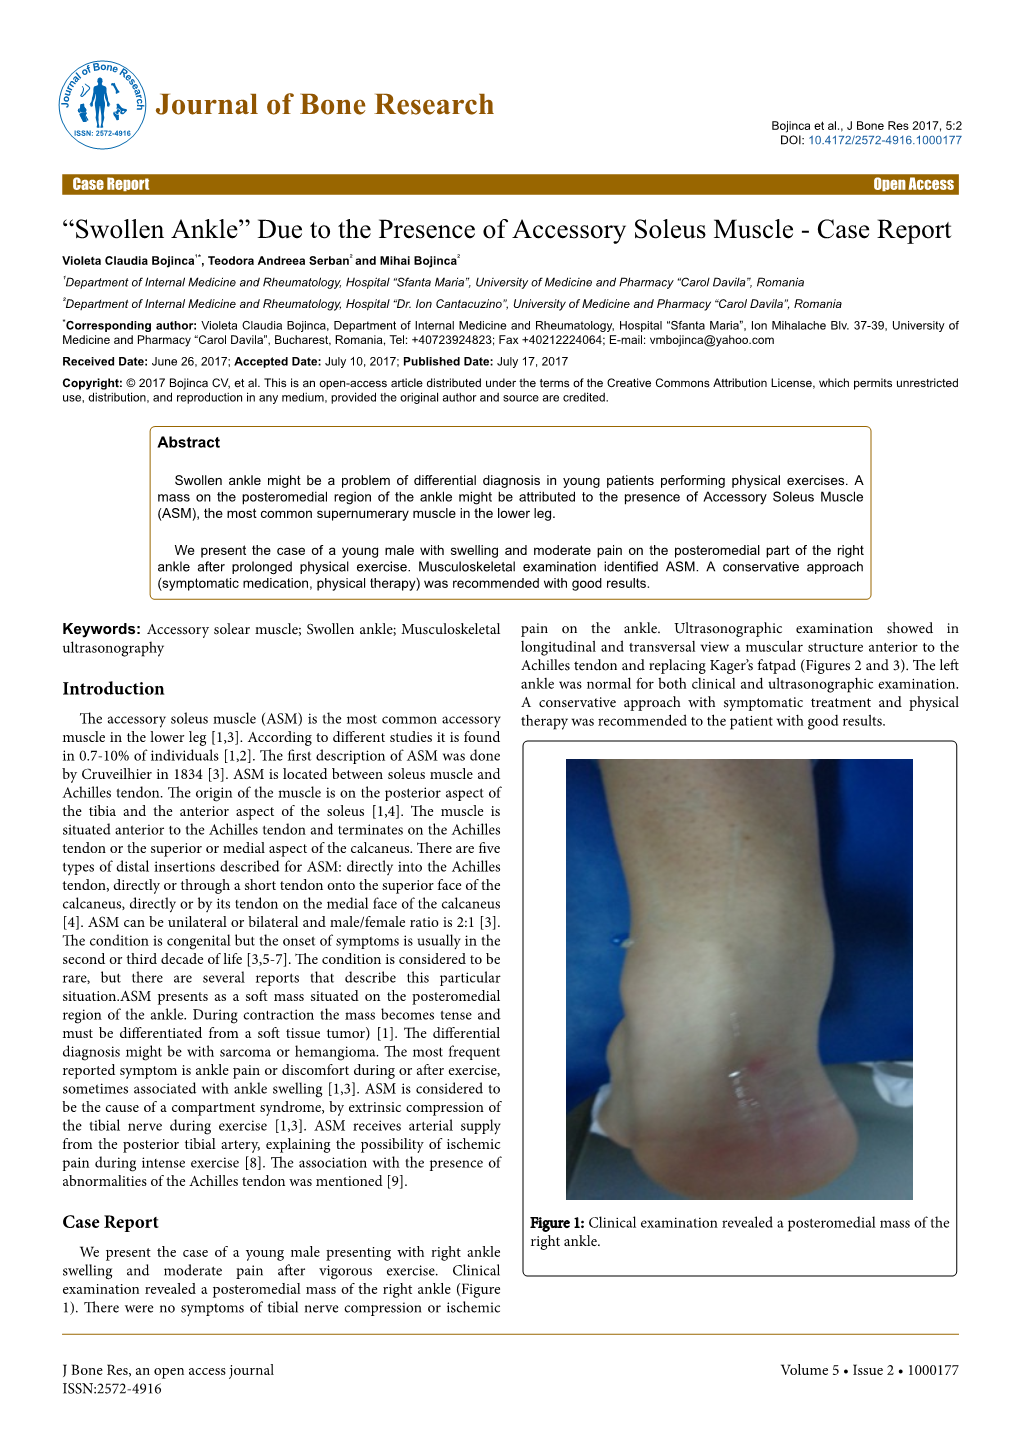 “Swollen Ankle” Due to the Presence Of